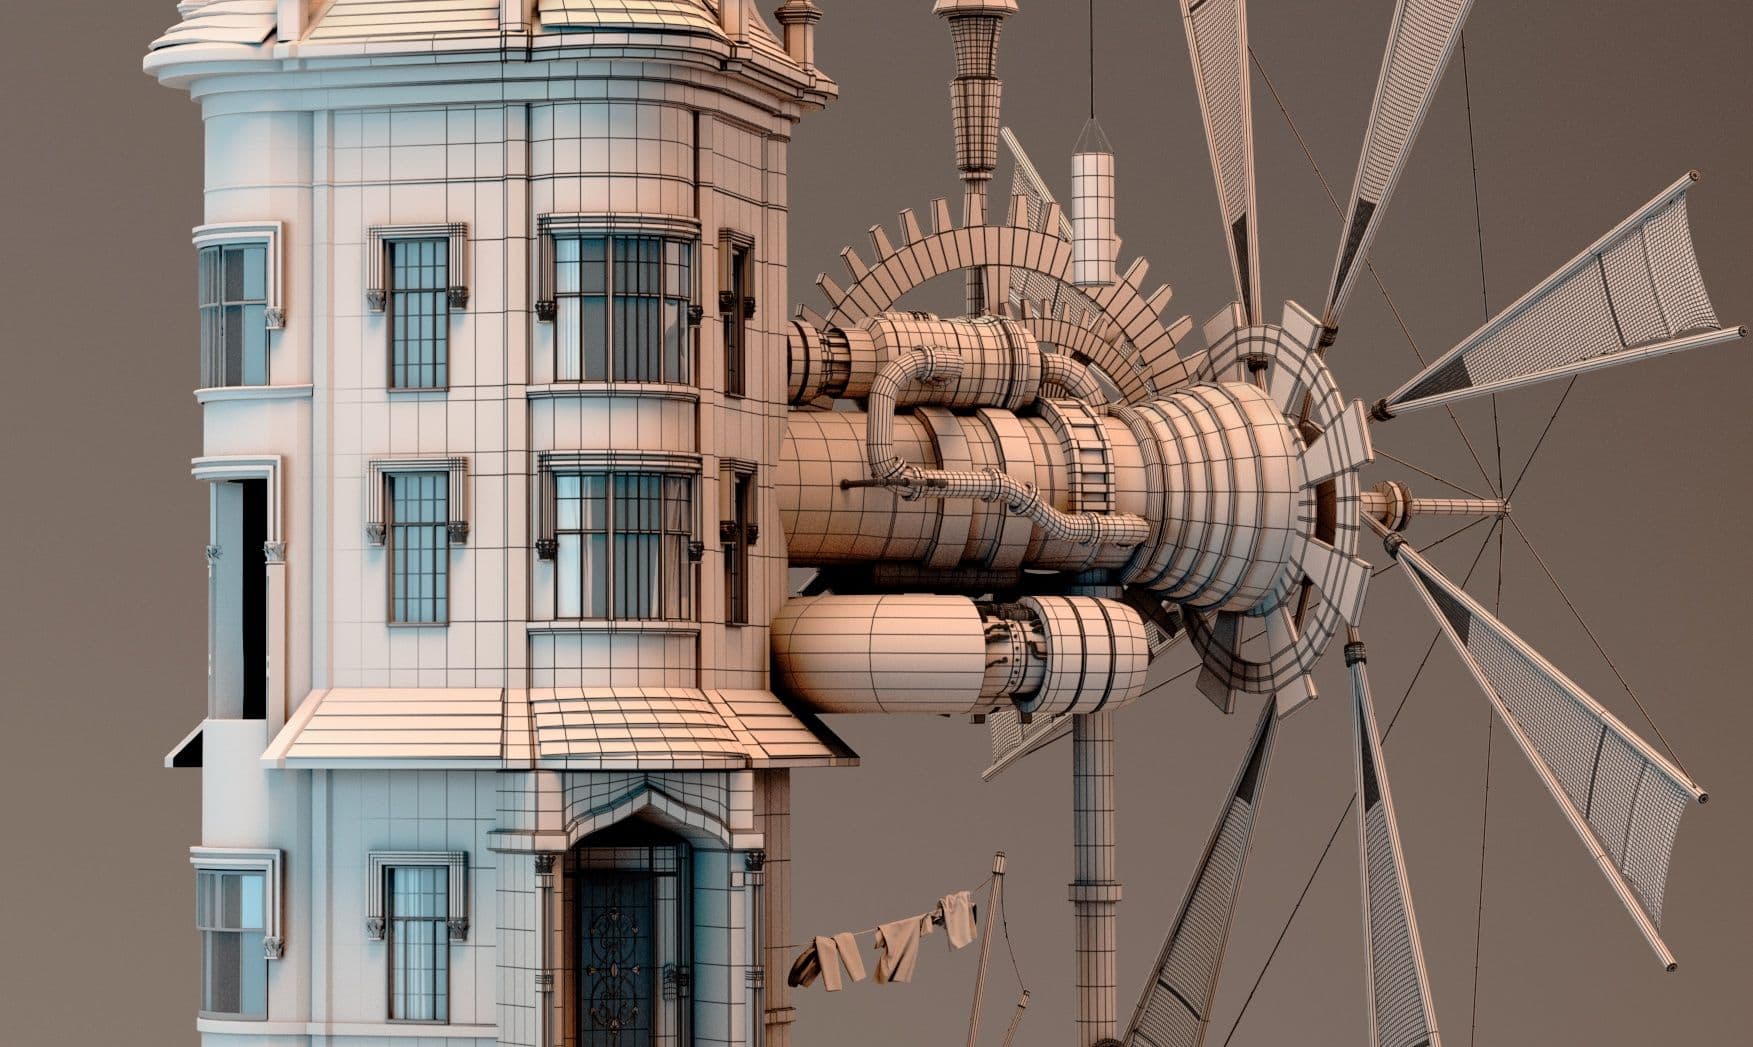 Make Your Own Steampunk House in 3D